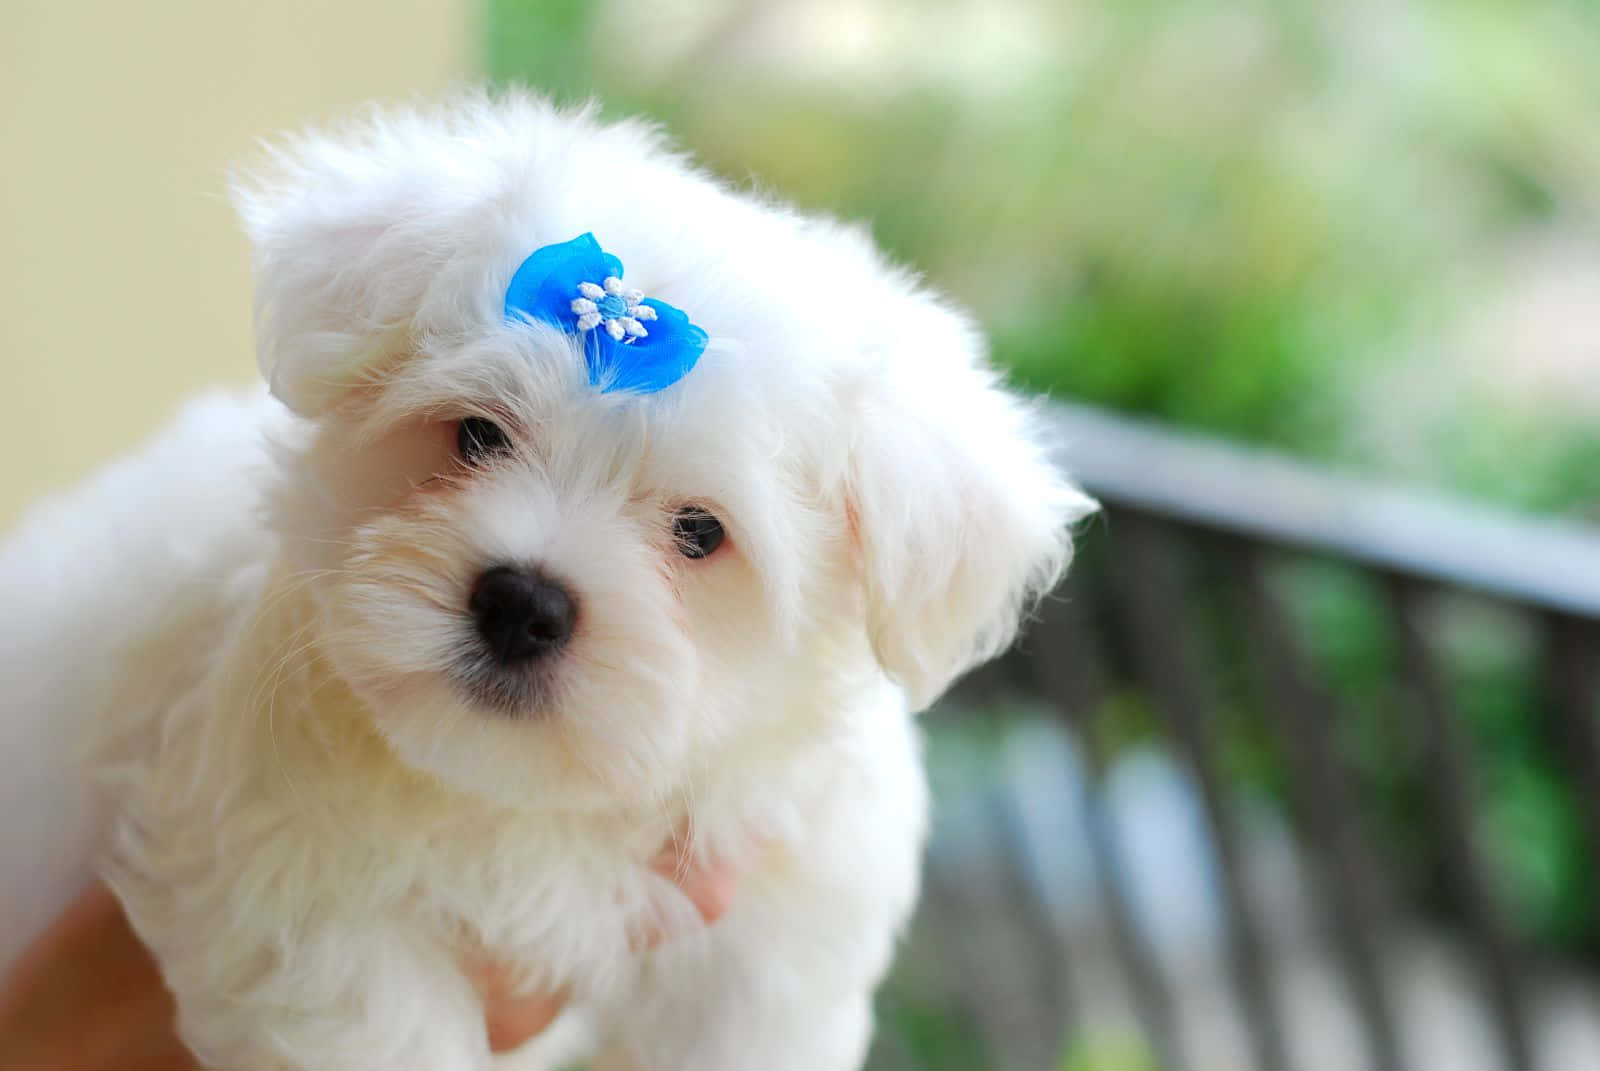 A White Puppy With A Blue Bow On Its Head